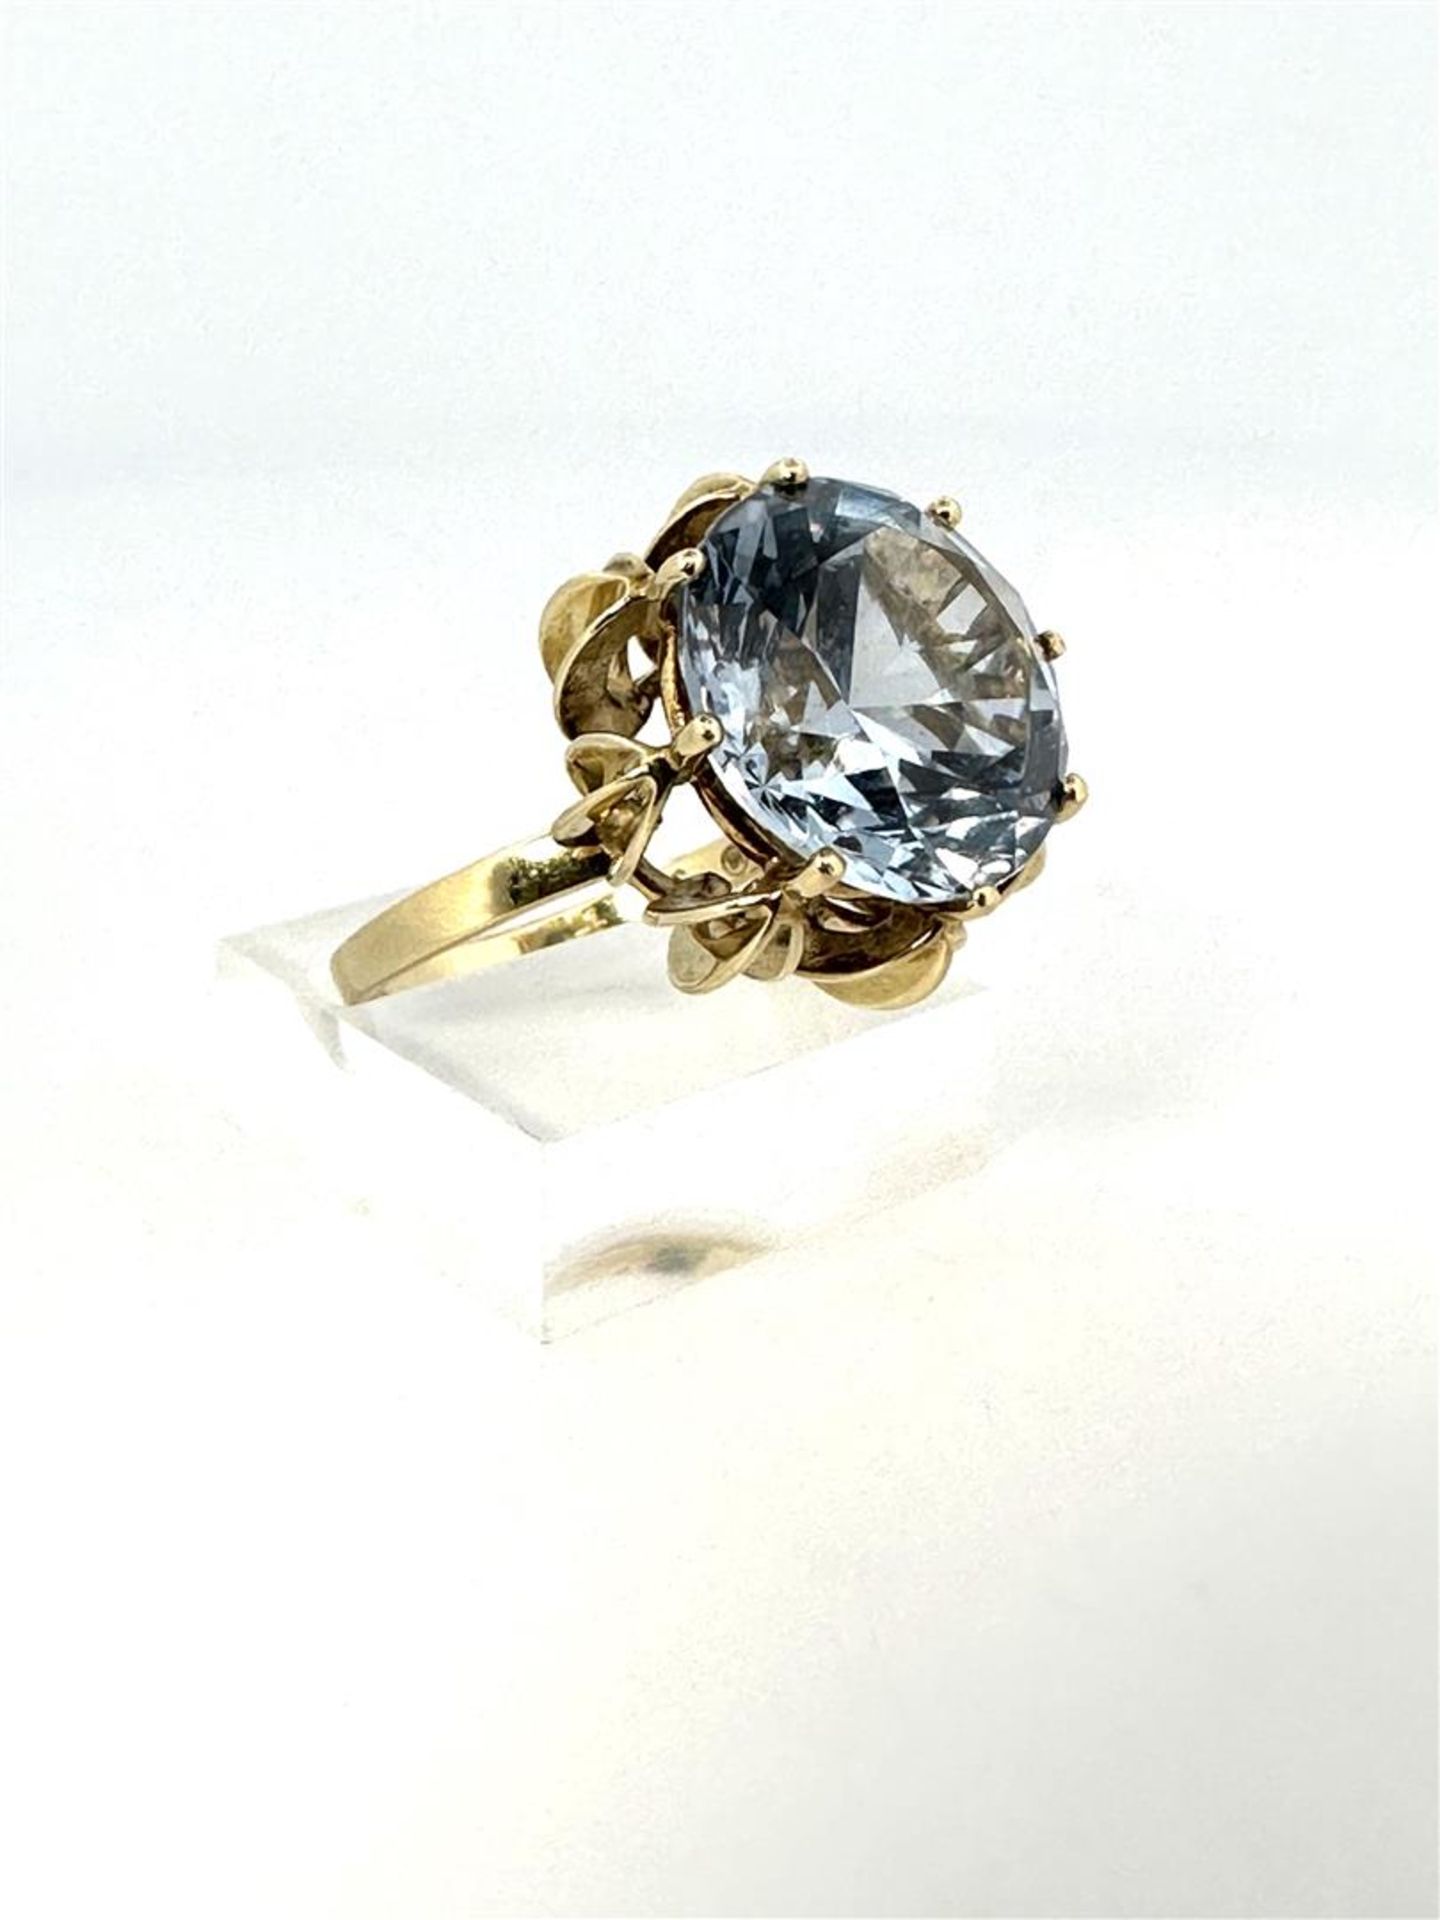 14kt yellow gold statement solitaire ring set with aquamarine.
The ring is set with a brilliant cut 